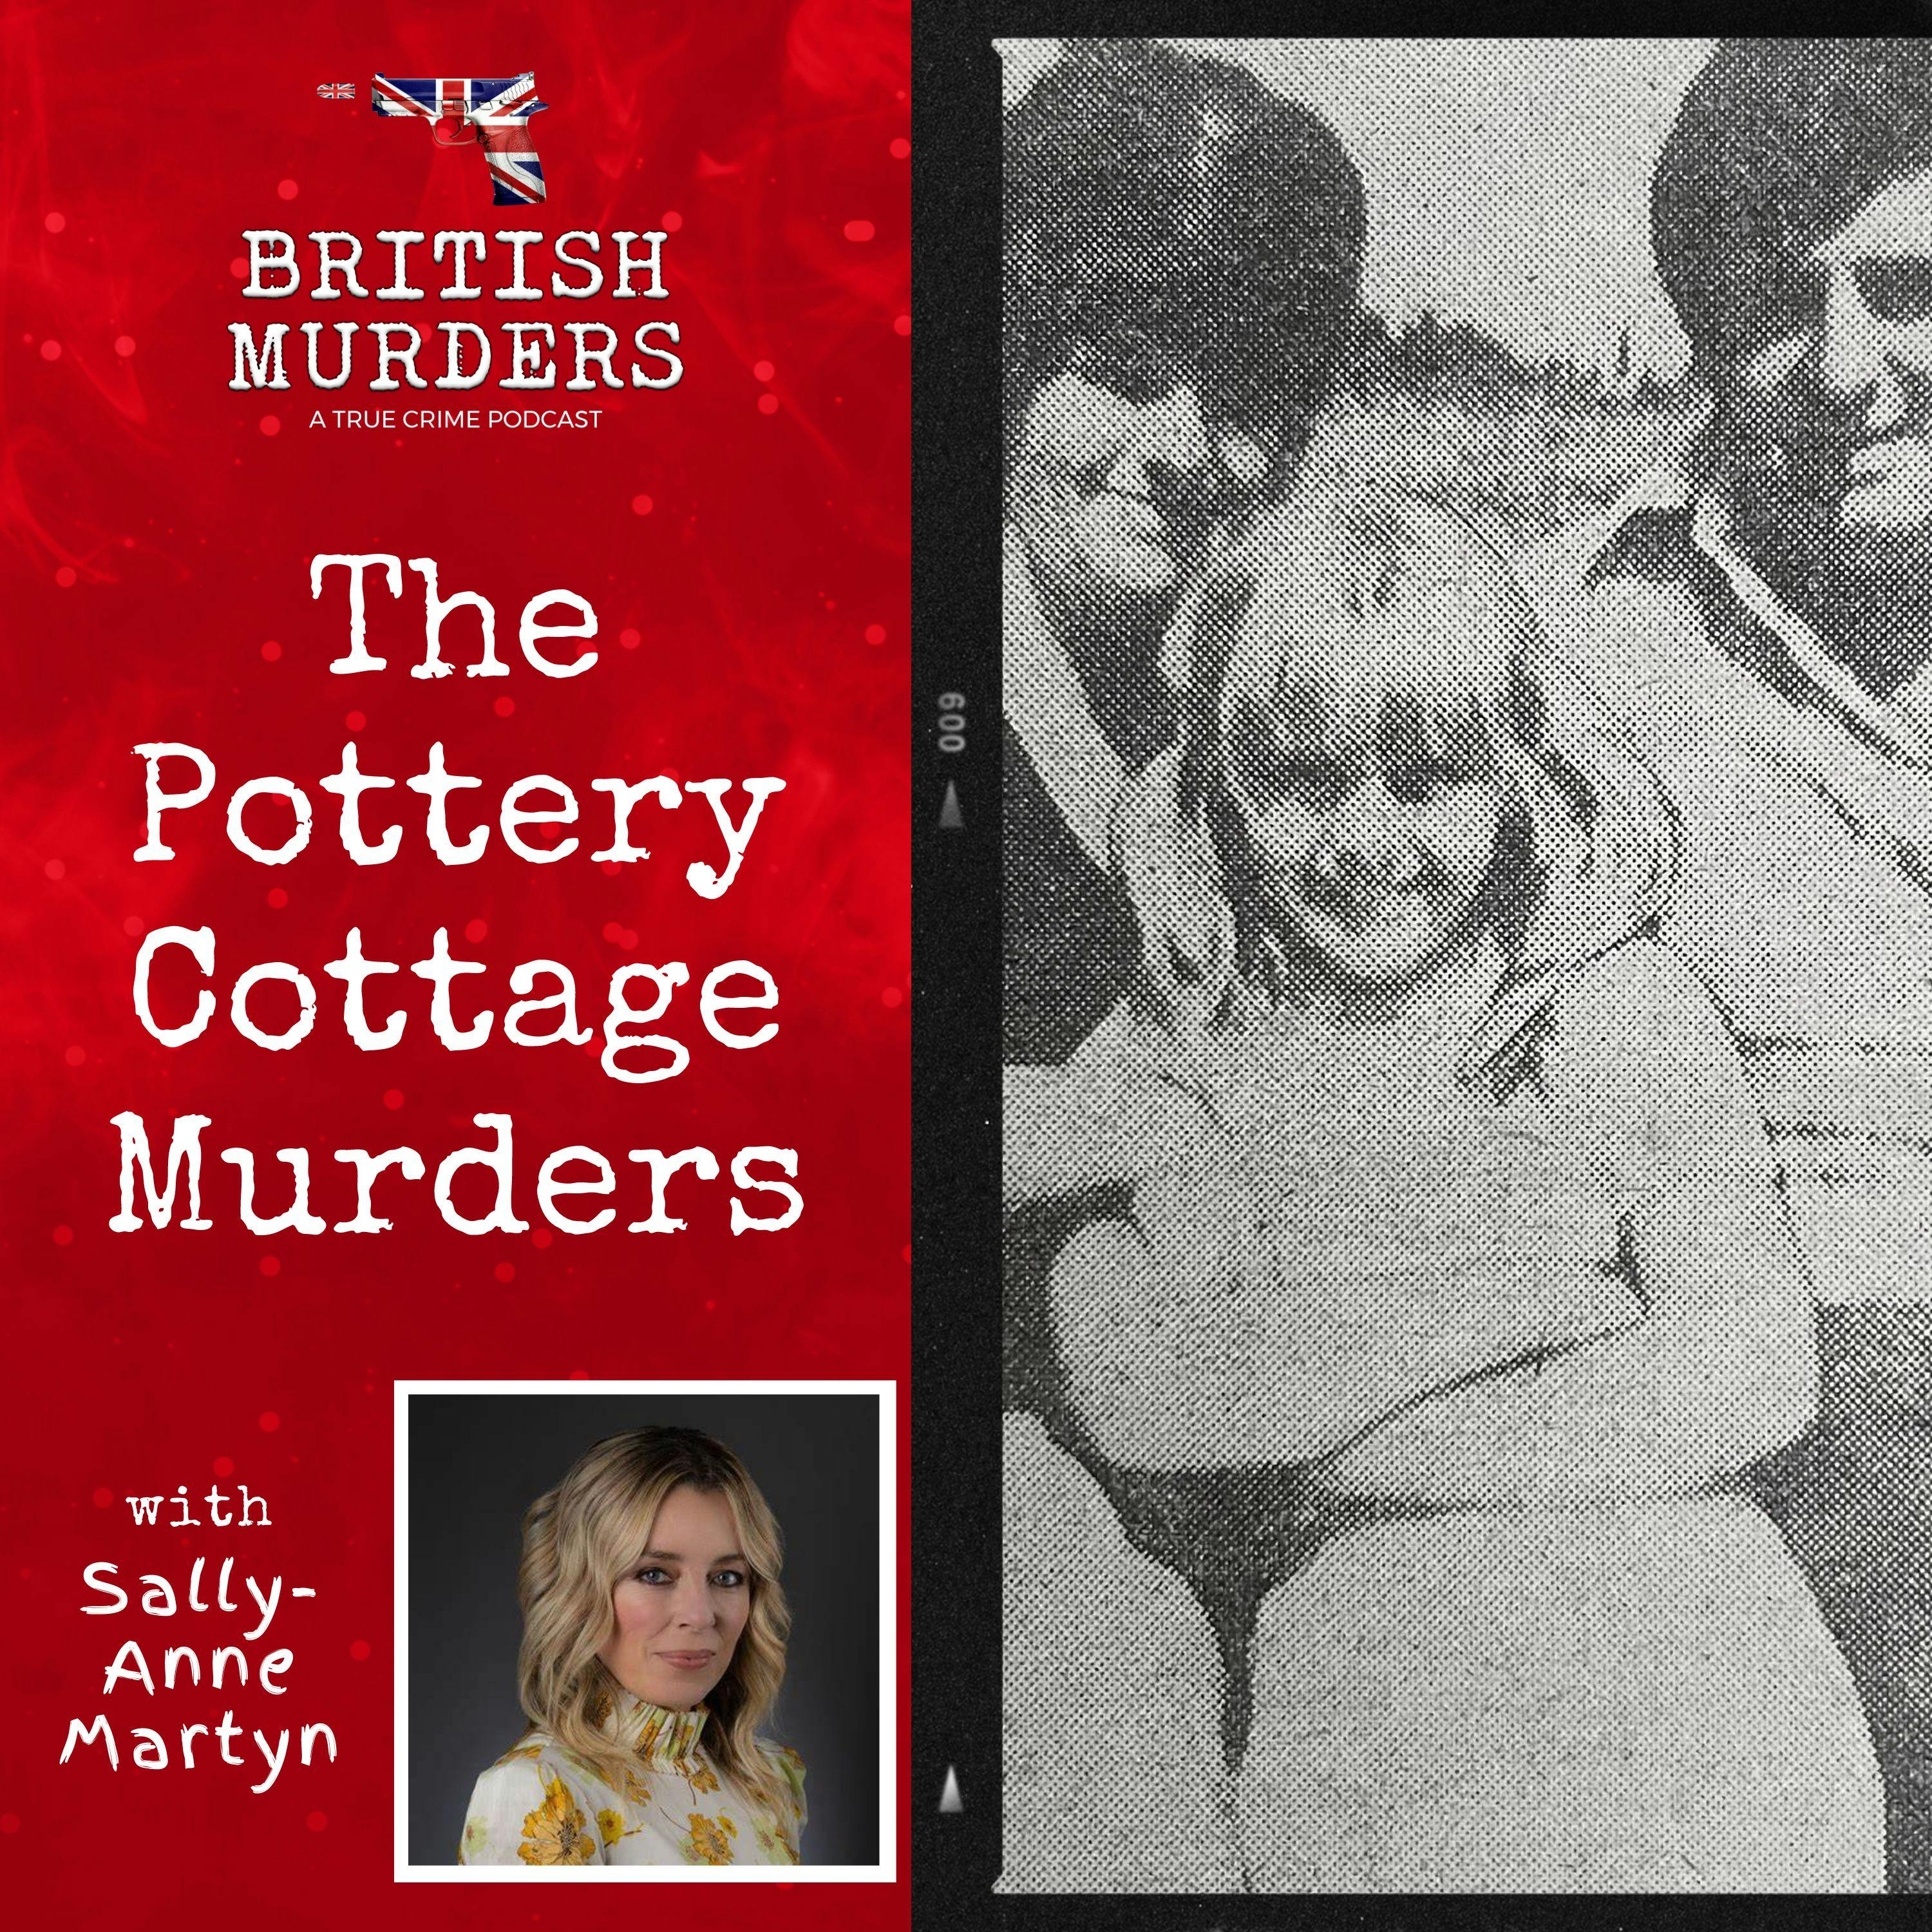 Chesterfield’s Darkest Day: The 1977 Pottery Cottage Murders